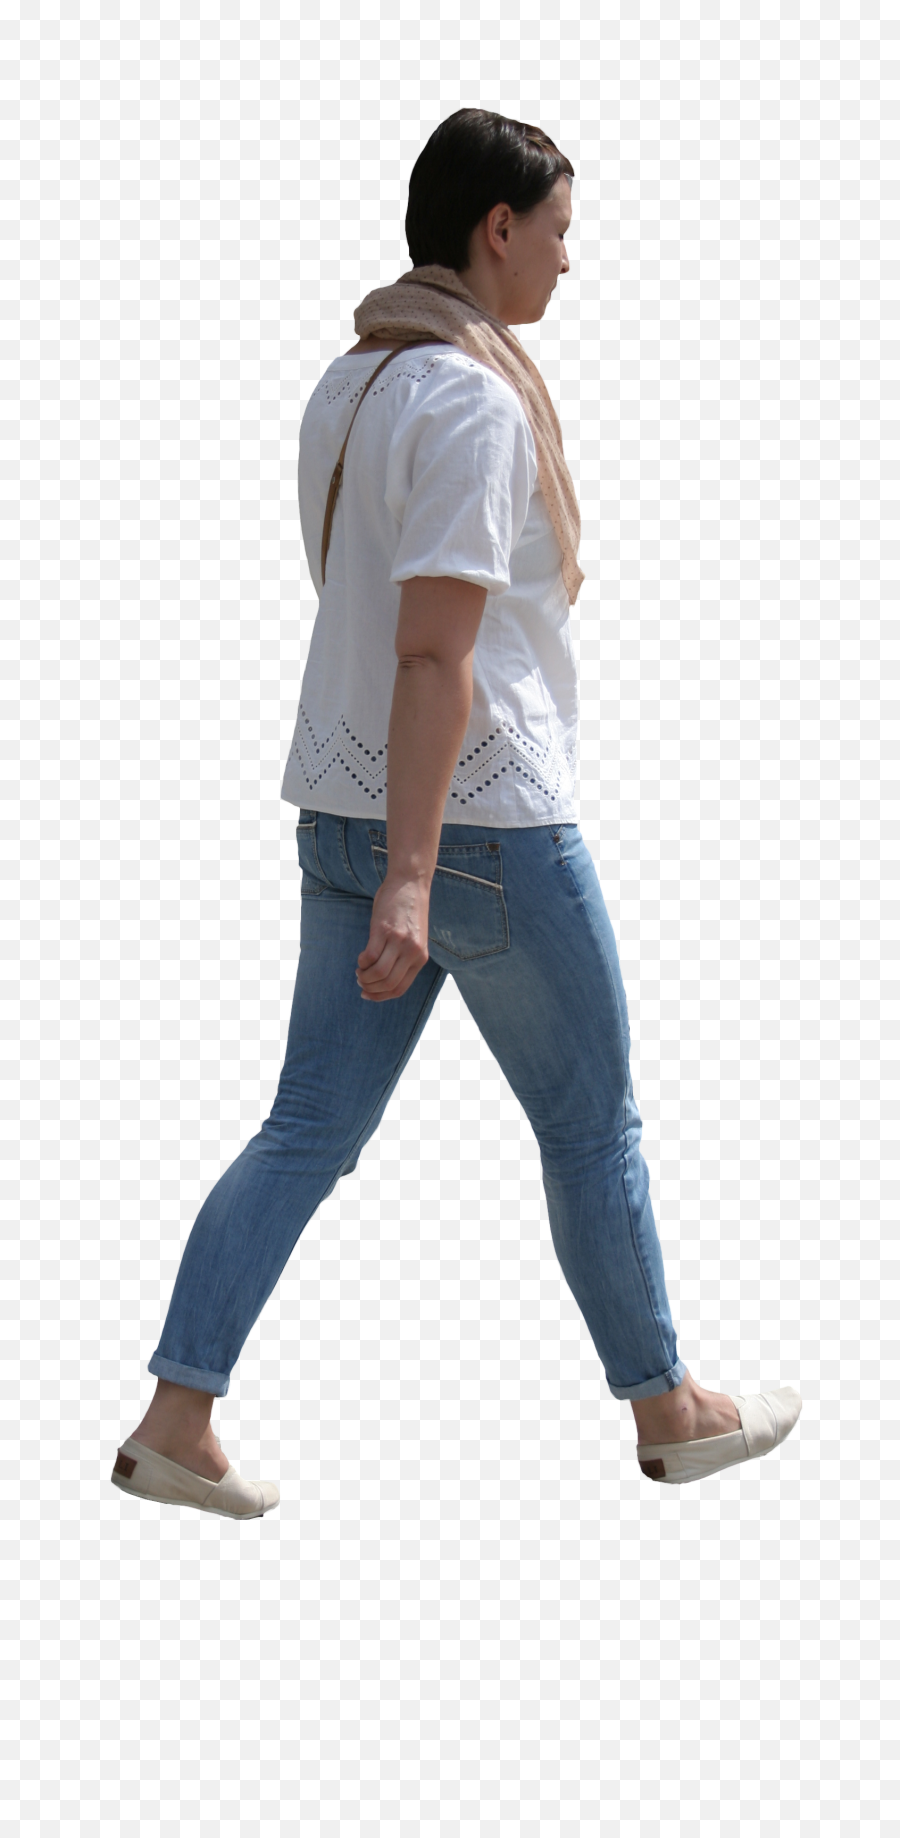 Women Walking Cut Out Png Image With No - Standing People,Woman Walking Png